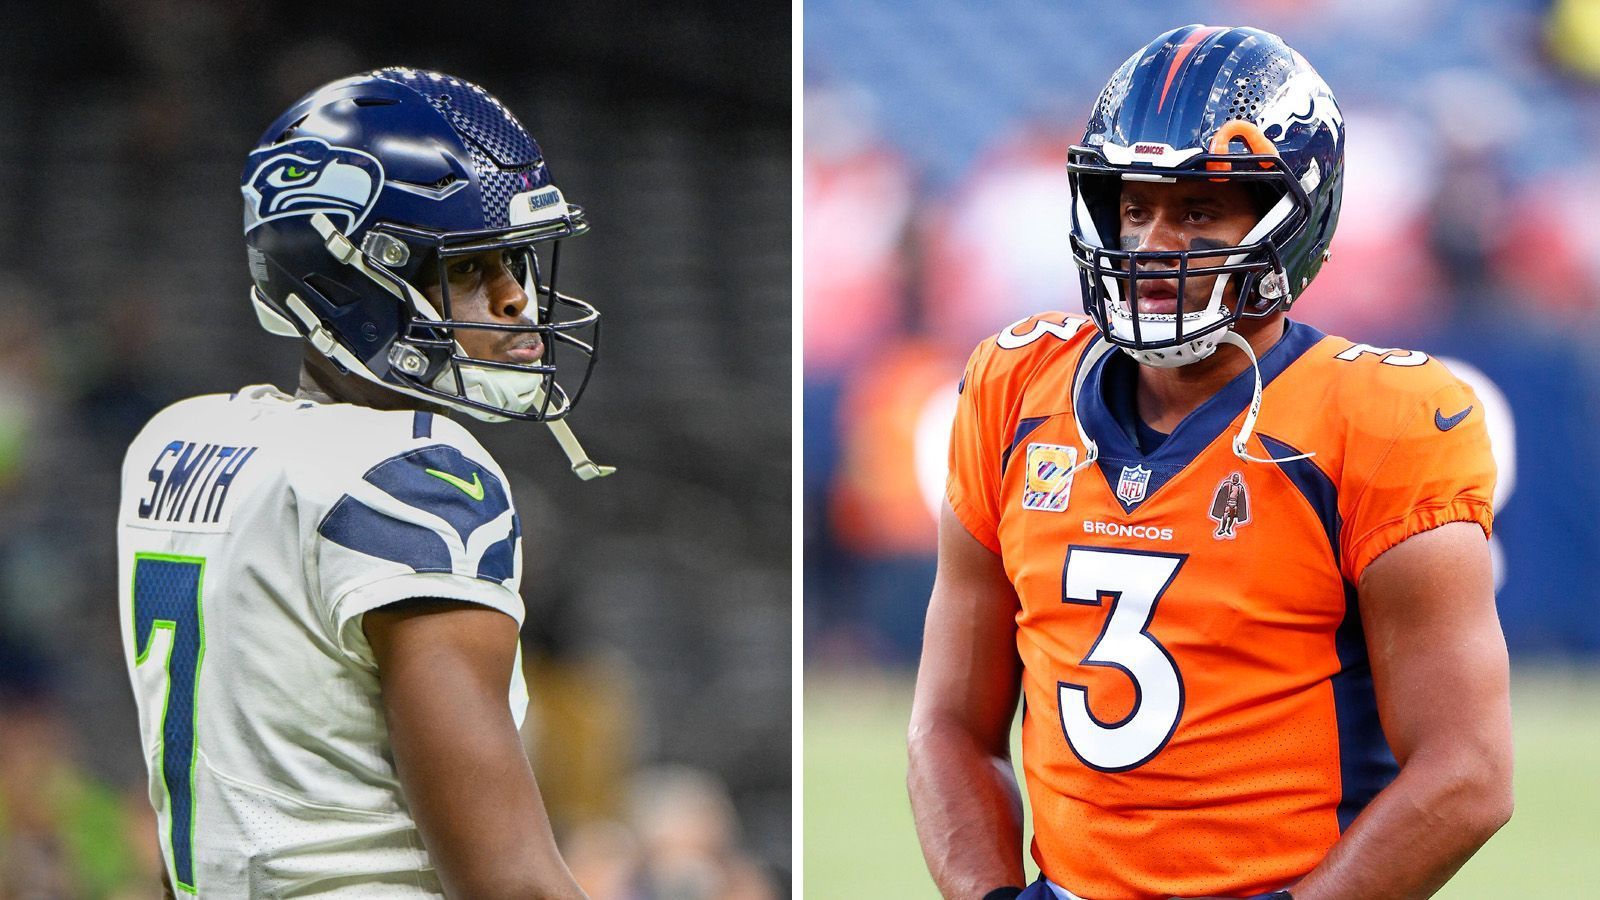 
                <strong>"BrOnCoS cOuNtRy - LeT's RiDe"</strong><br>
                Geno Smith in dieser Saison:&#x2022; 1,305 Passing Yards, 75,2 Prozent Completions, 9 TD, 2 INT, 113,2 Passer Rating, 1 Rushing TD<br>Russel Wilson in dieser Saison:&#x2022; 1,254 Passing Yards, 59,4 Prozent Completions, 4 TD, 3 INT, 82,8 Passer Rating, 1 Rushing TD<br>
              